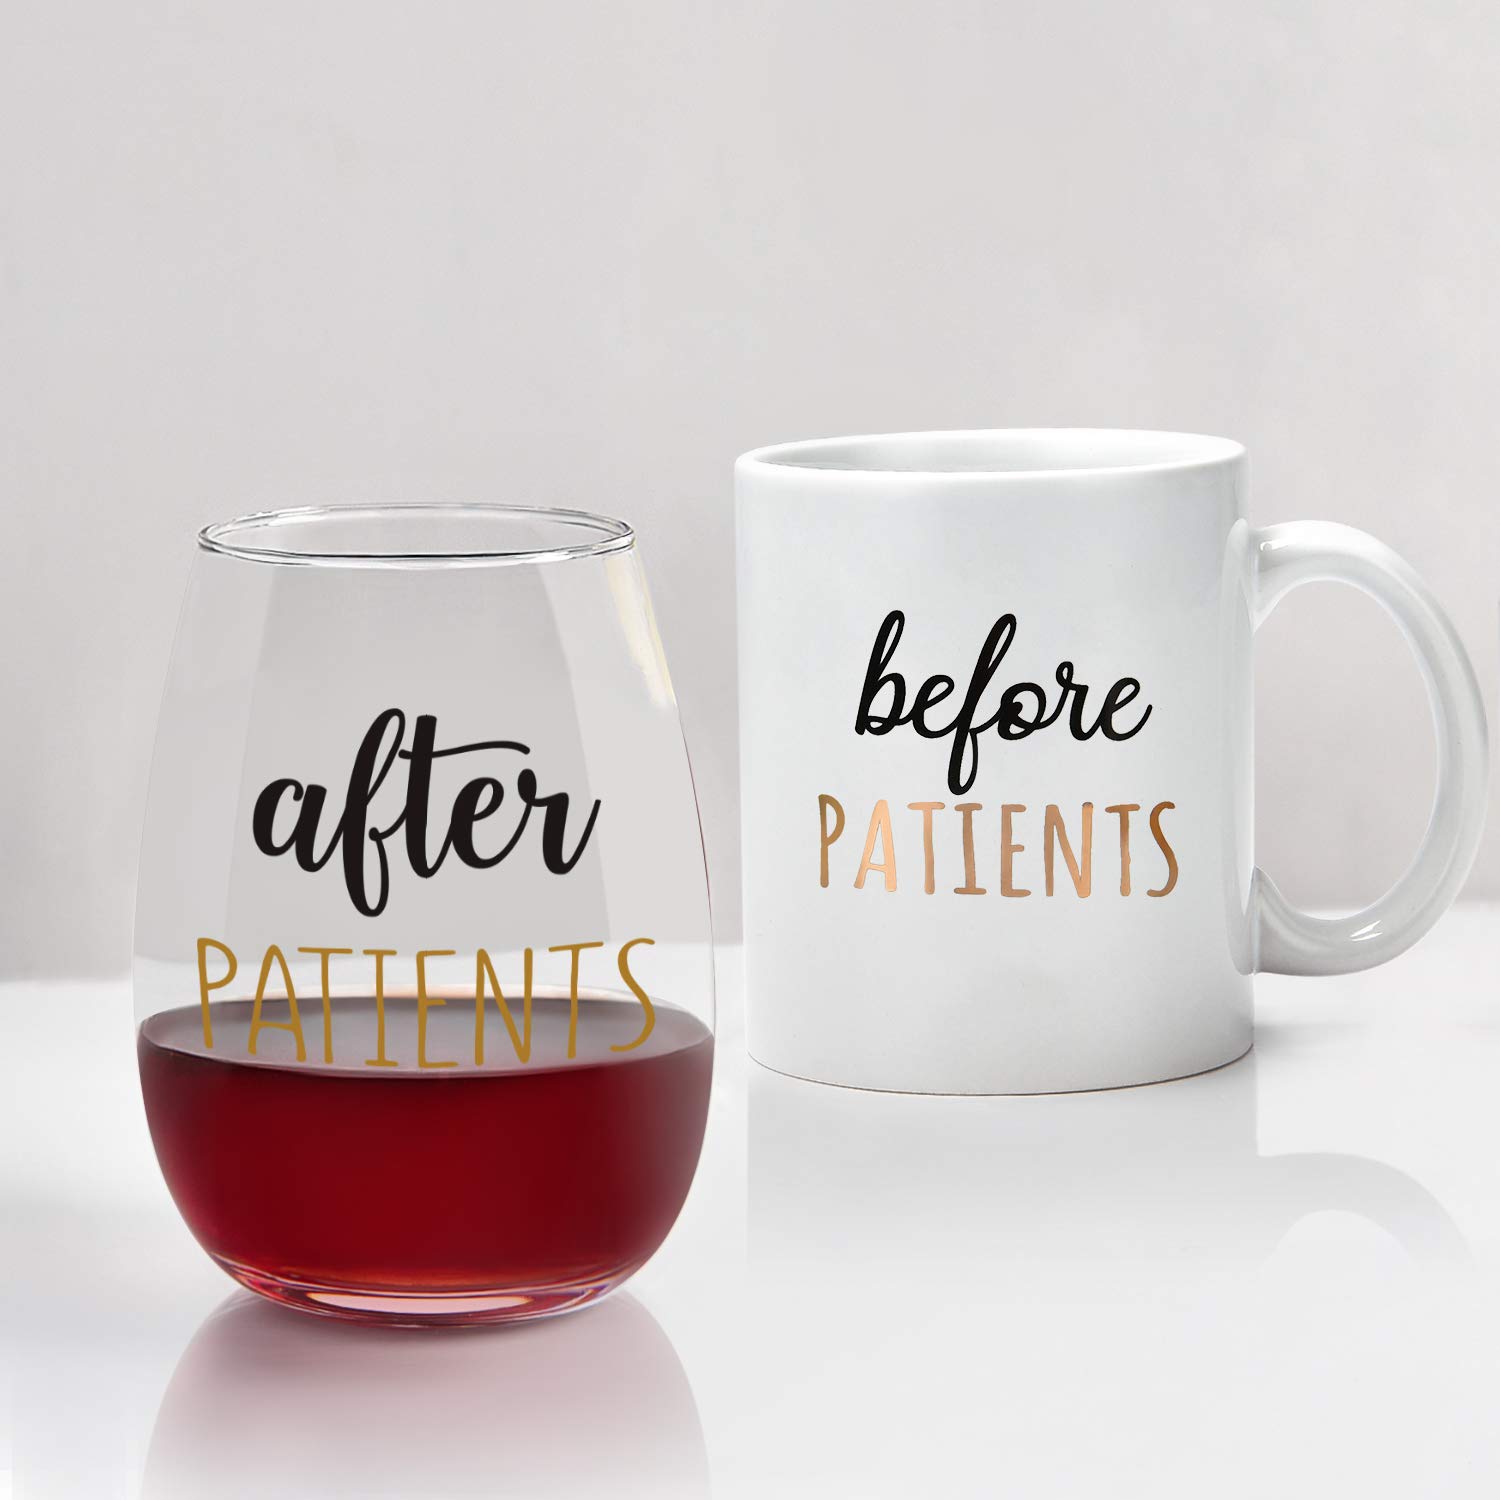 Gtmileo Before Patients, After Patients 11 oz Coffee Mug and 15 oz Stemless Wine Glass Set for Nurse, Doctor, Dentist, Dental, Physician, Hygienist